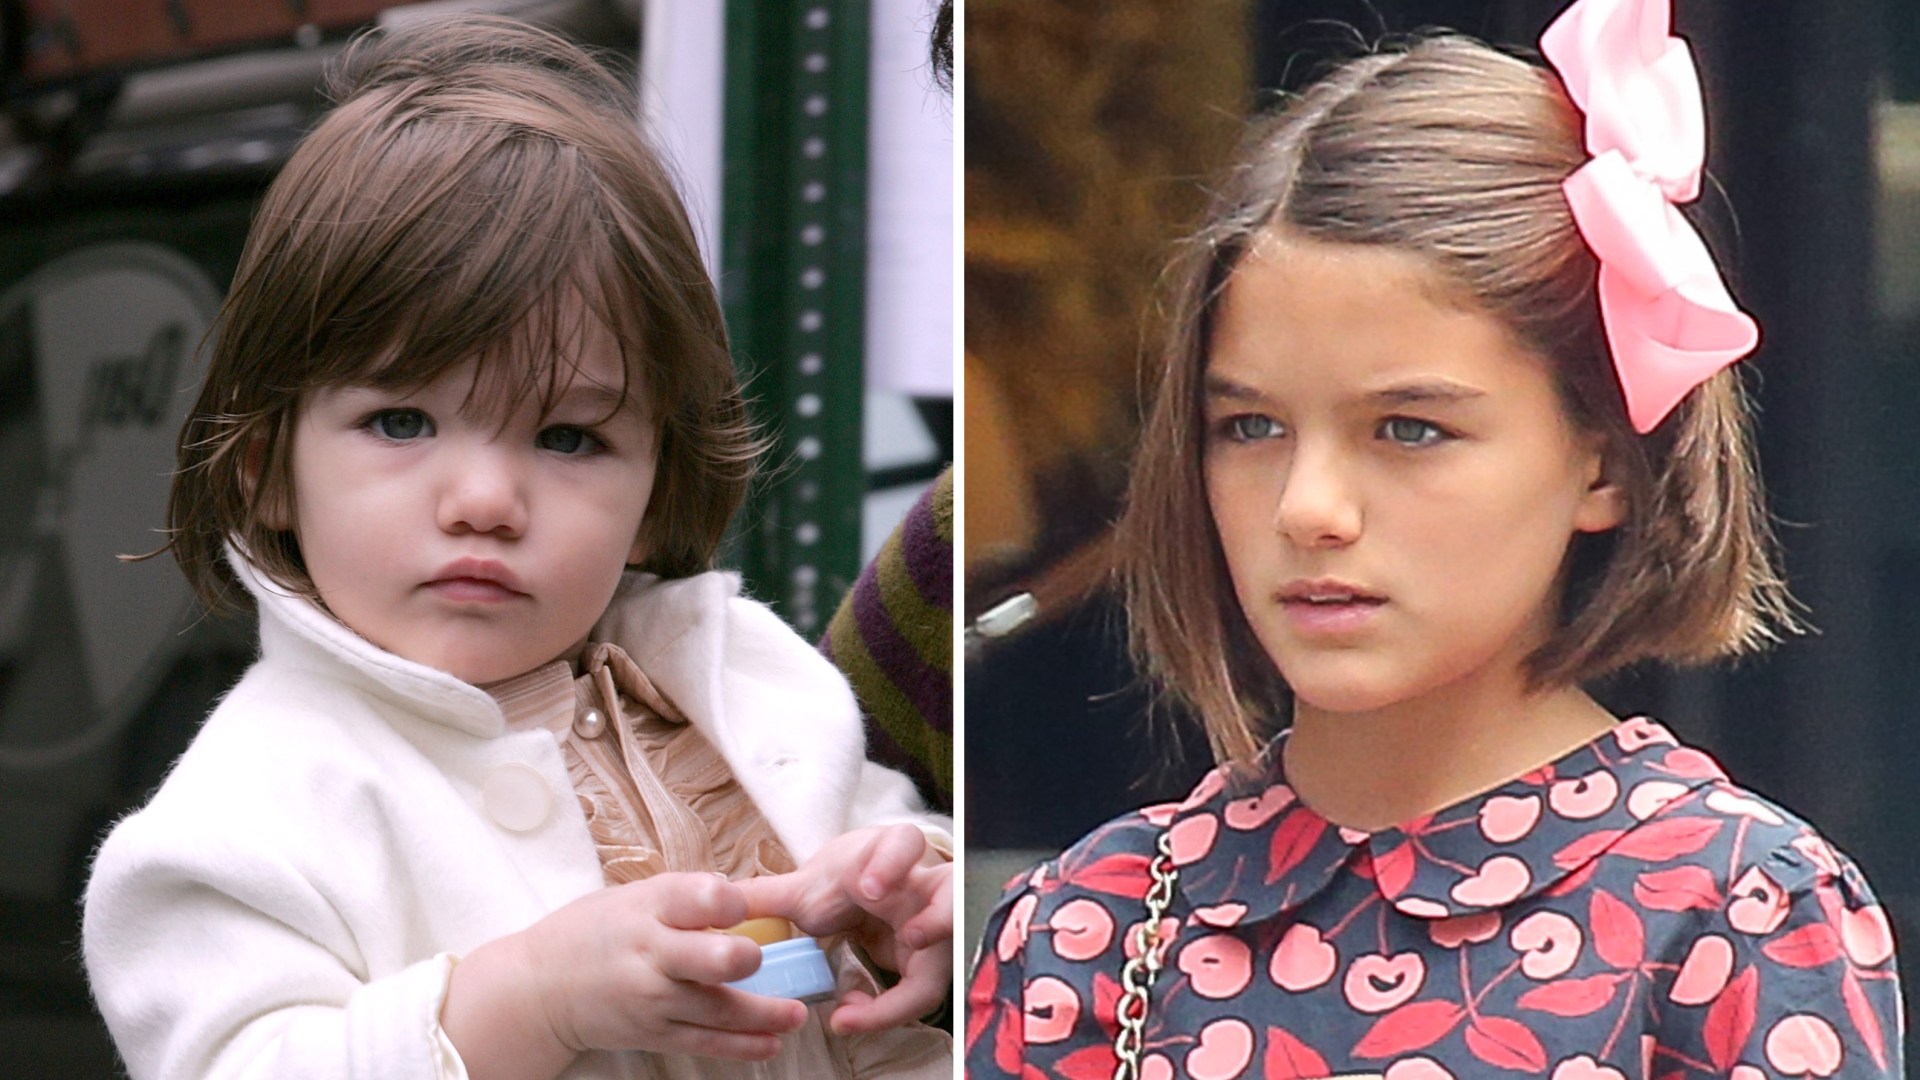 katie holmes tom cruise baby